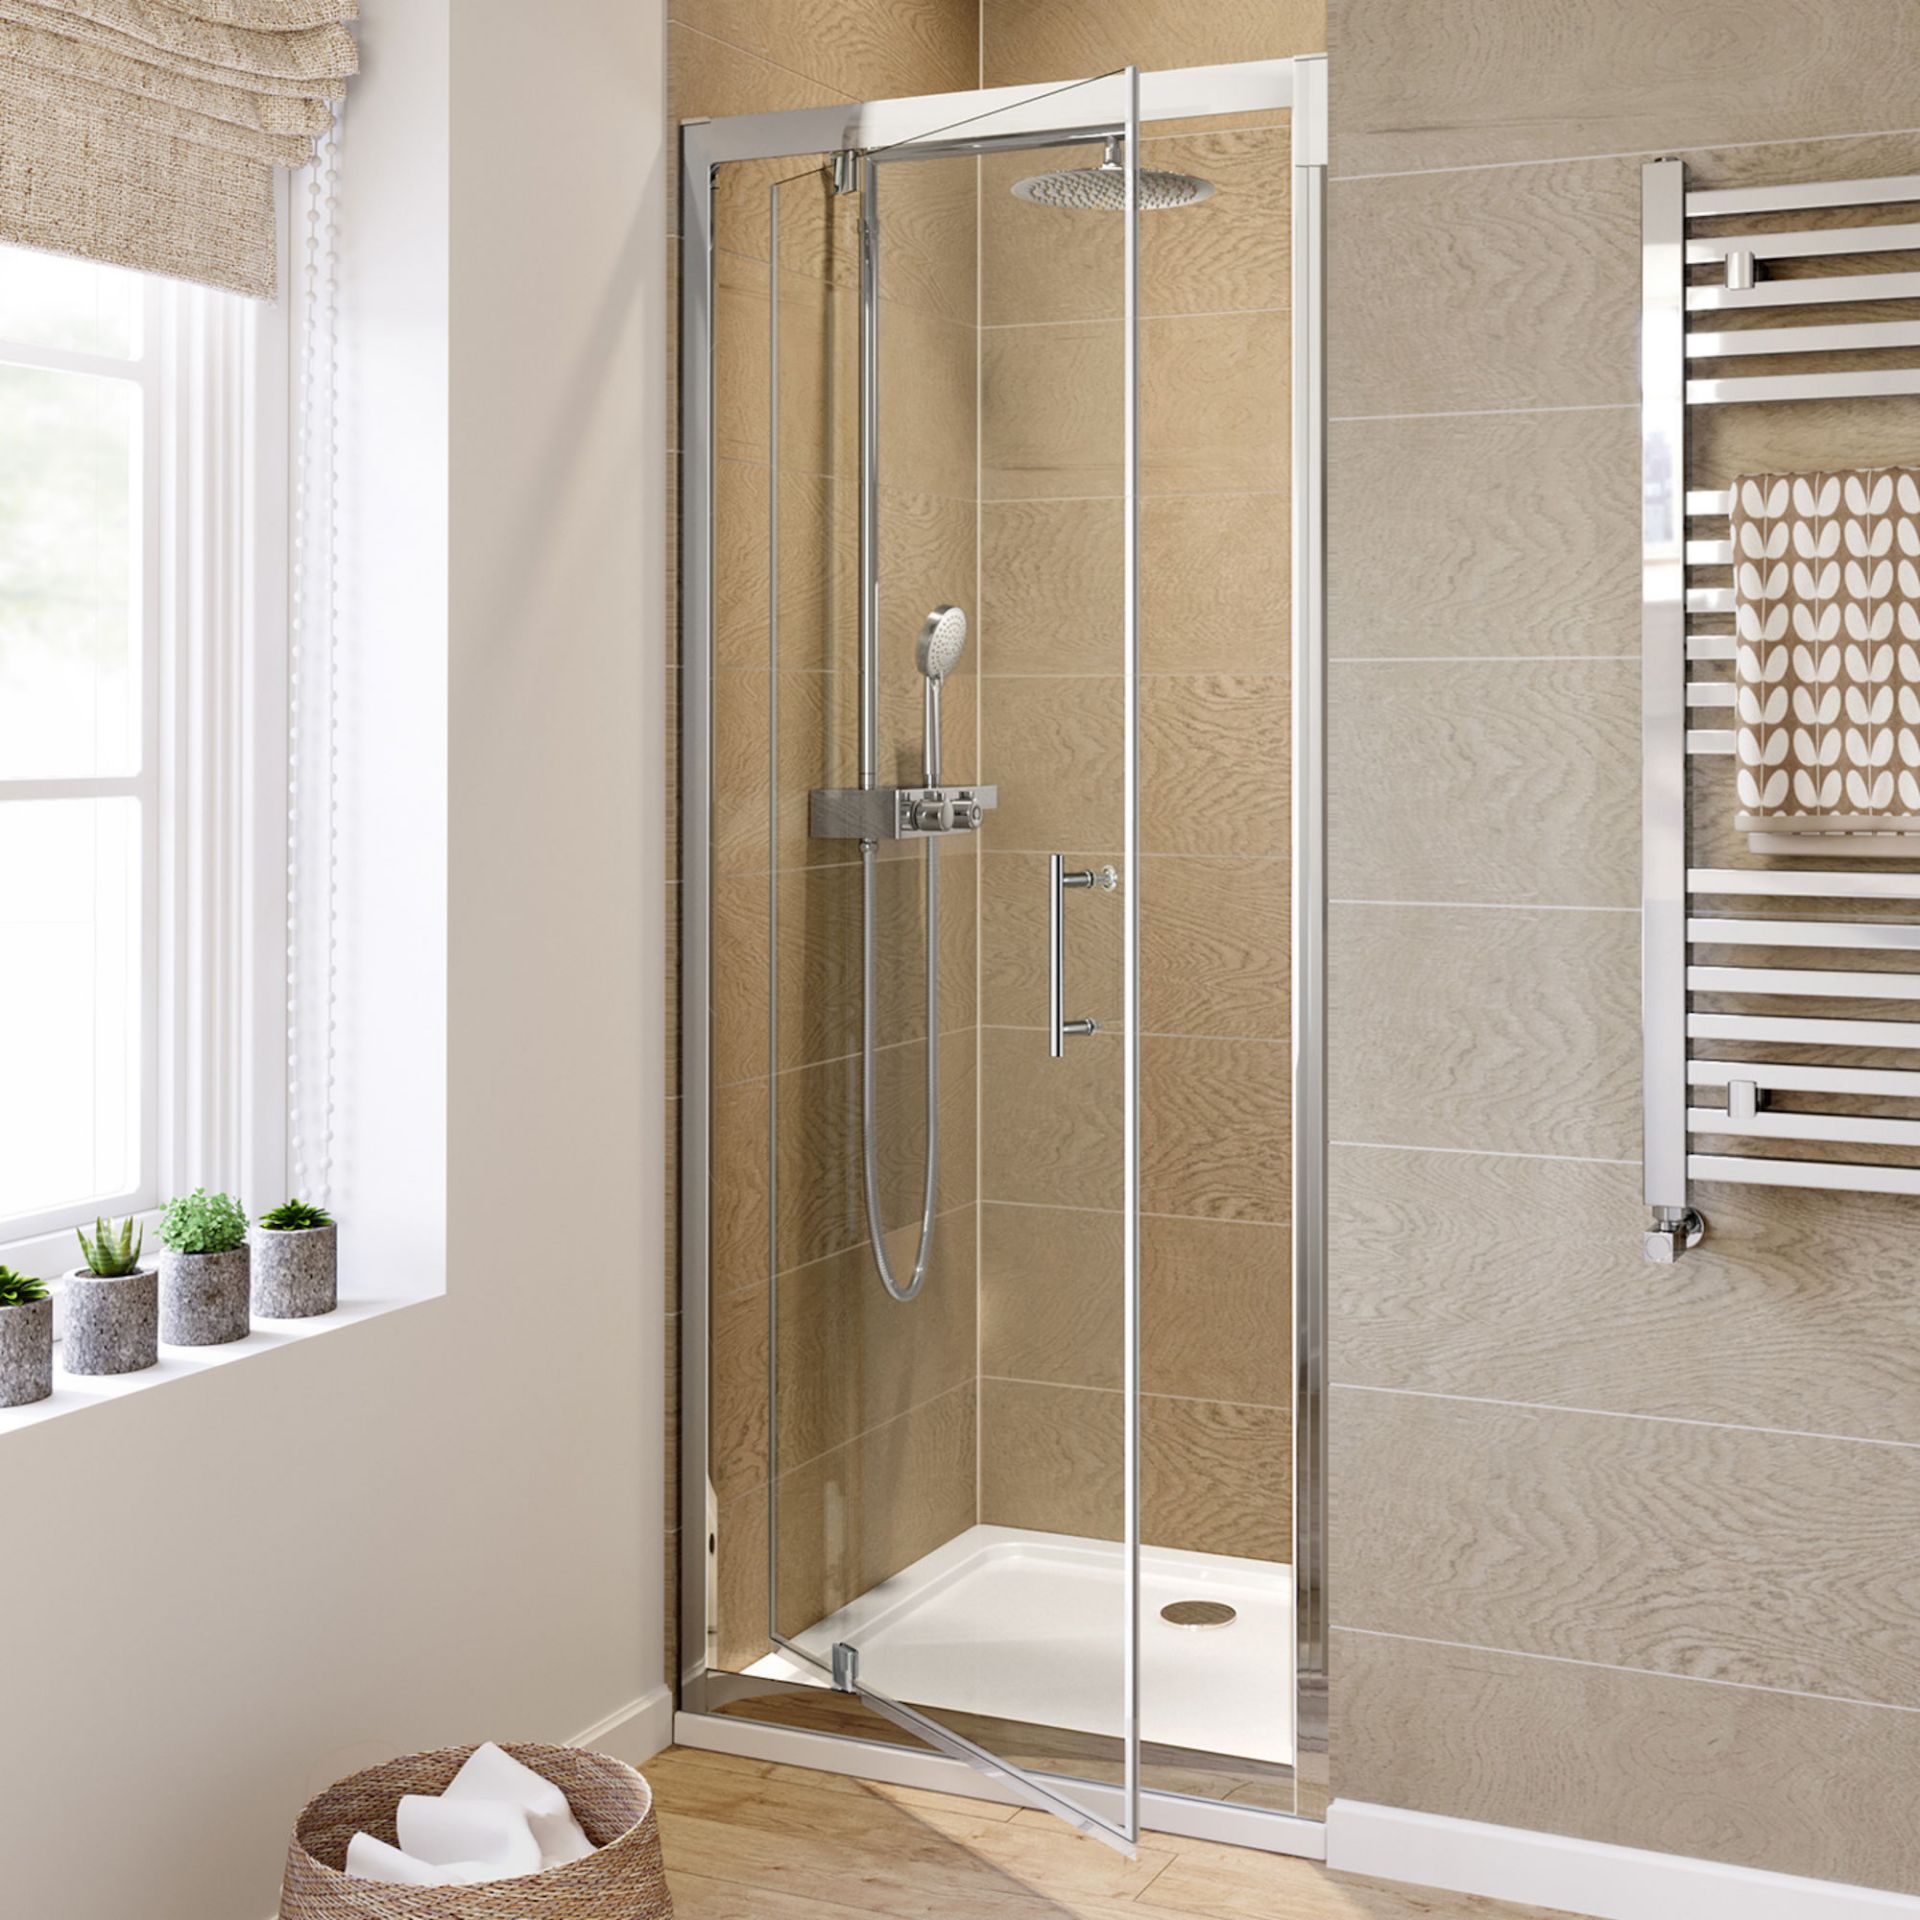 (VN106) 800mm - 6mm - Elements Pivot Shower Door. 6mm Safety Glass Fully waterproof tested